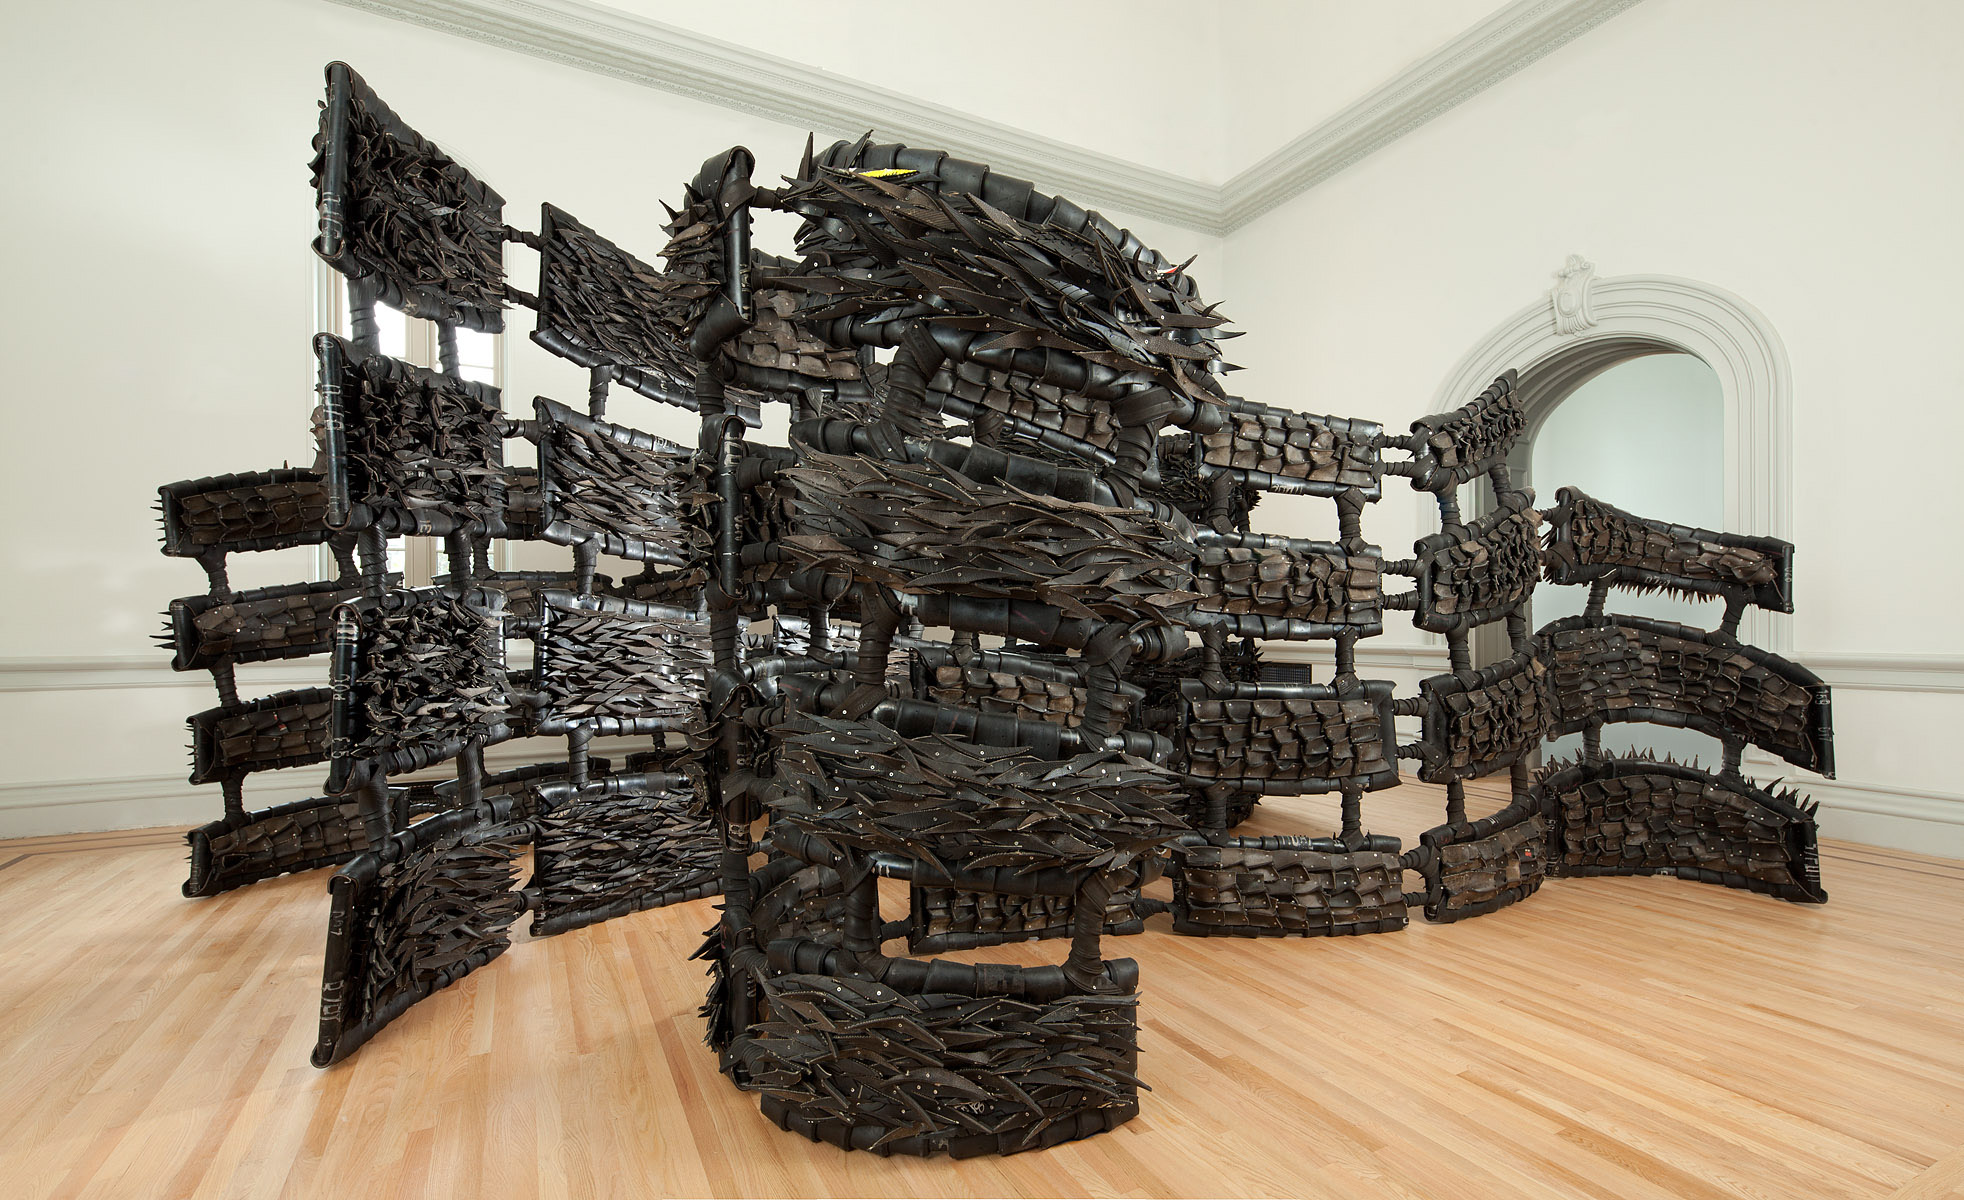 Chakaia Booker, ANONYMOUS DONOR, 2015. Renwick Gallery of the Smithsonian American Art Museum. Photo by Ron Blunt.